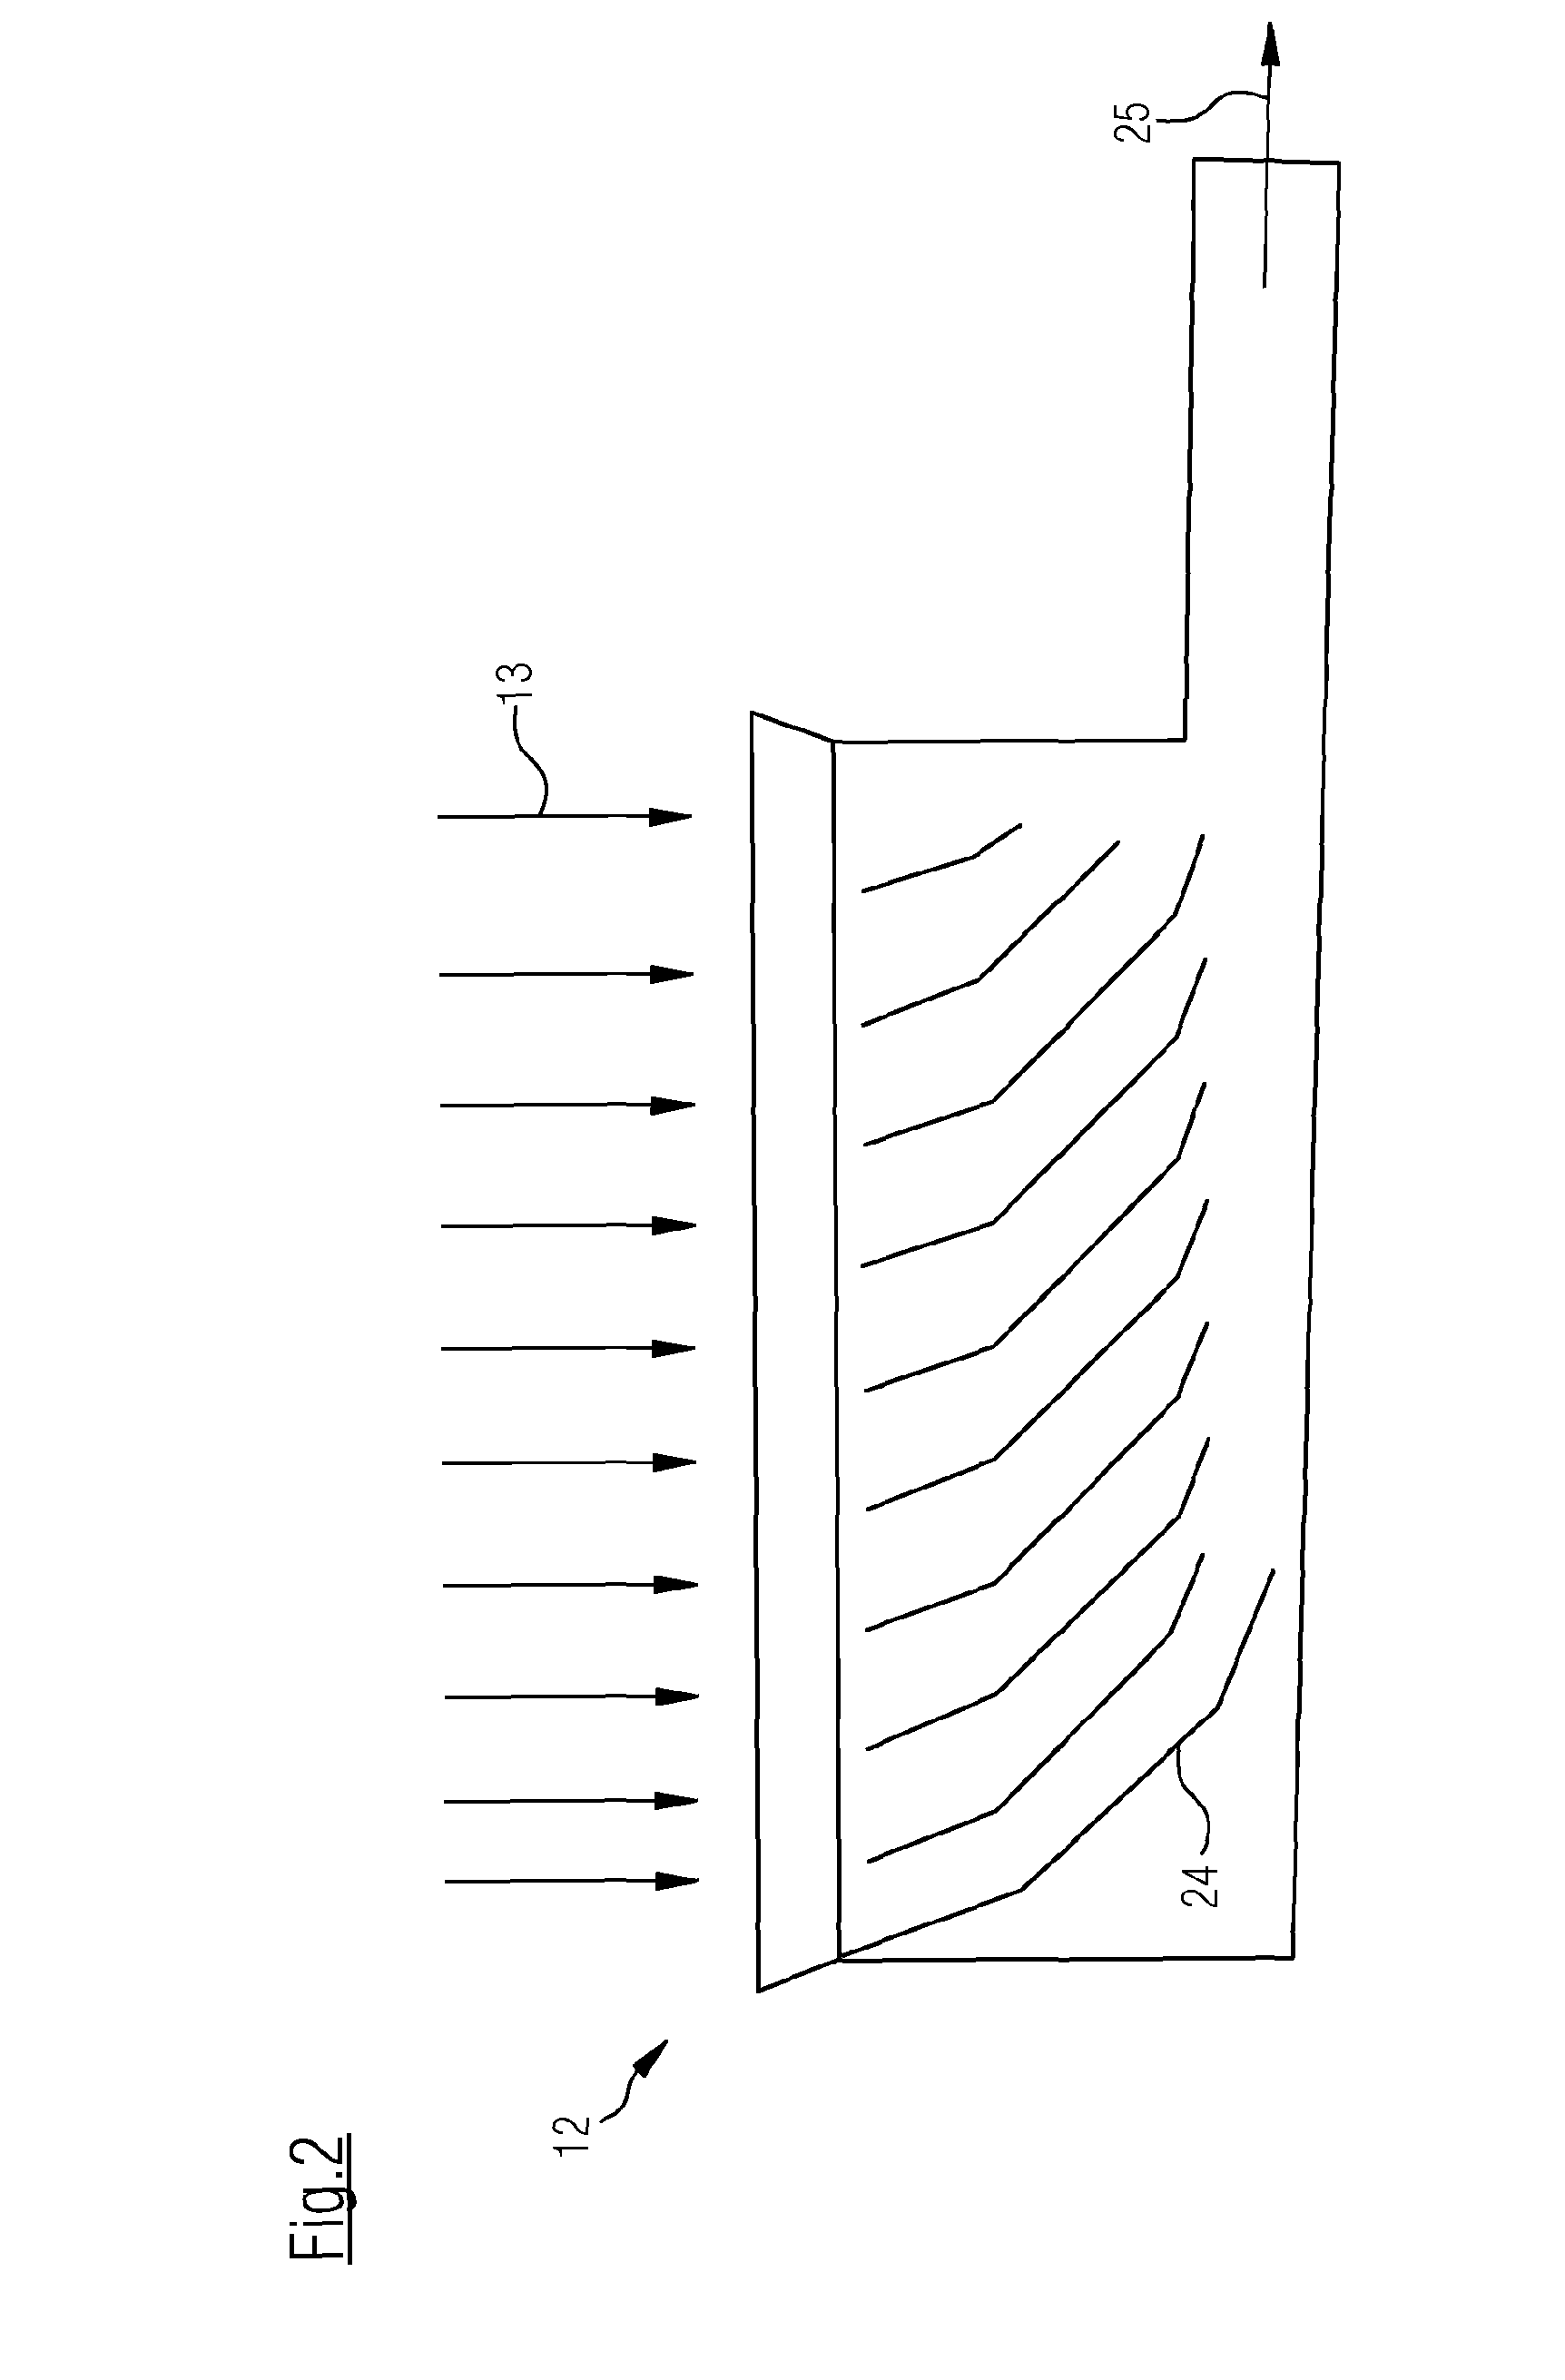 Sheet forming unit for producing a material web and method for operating the sheet forming unit